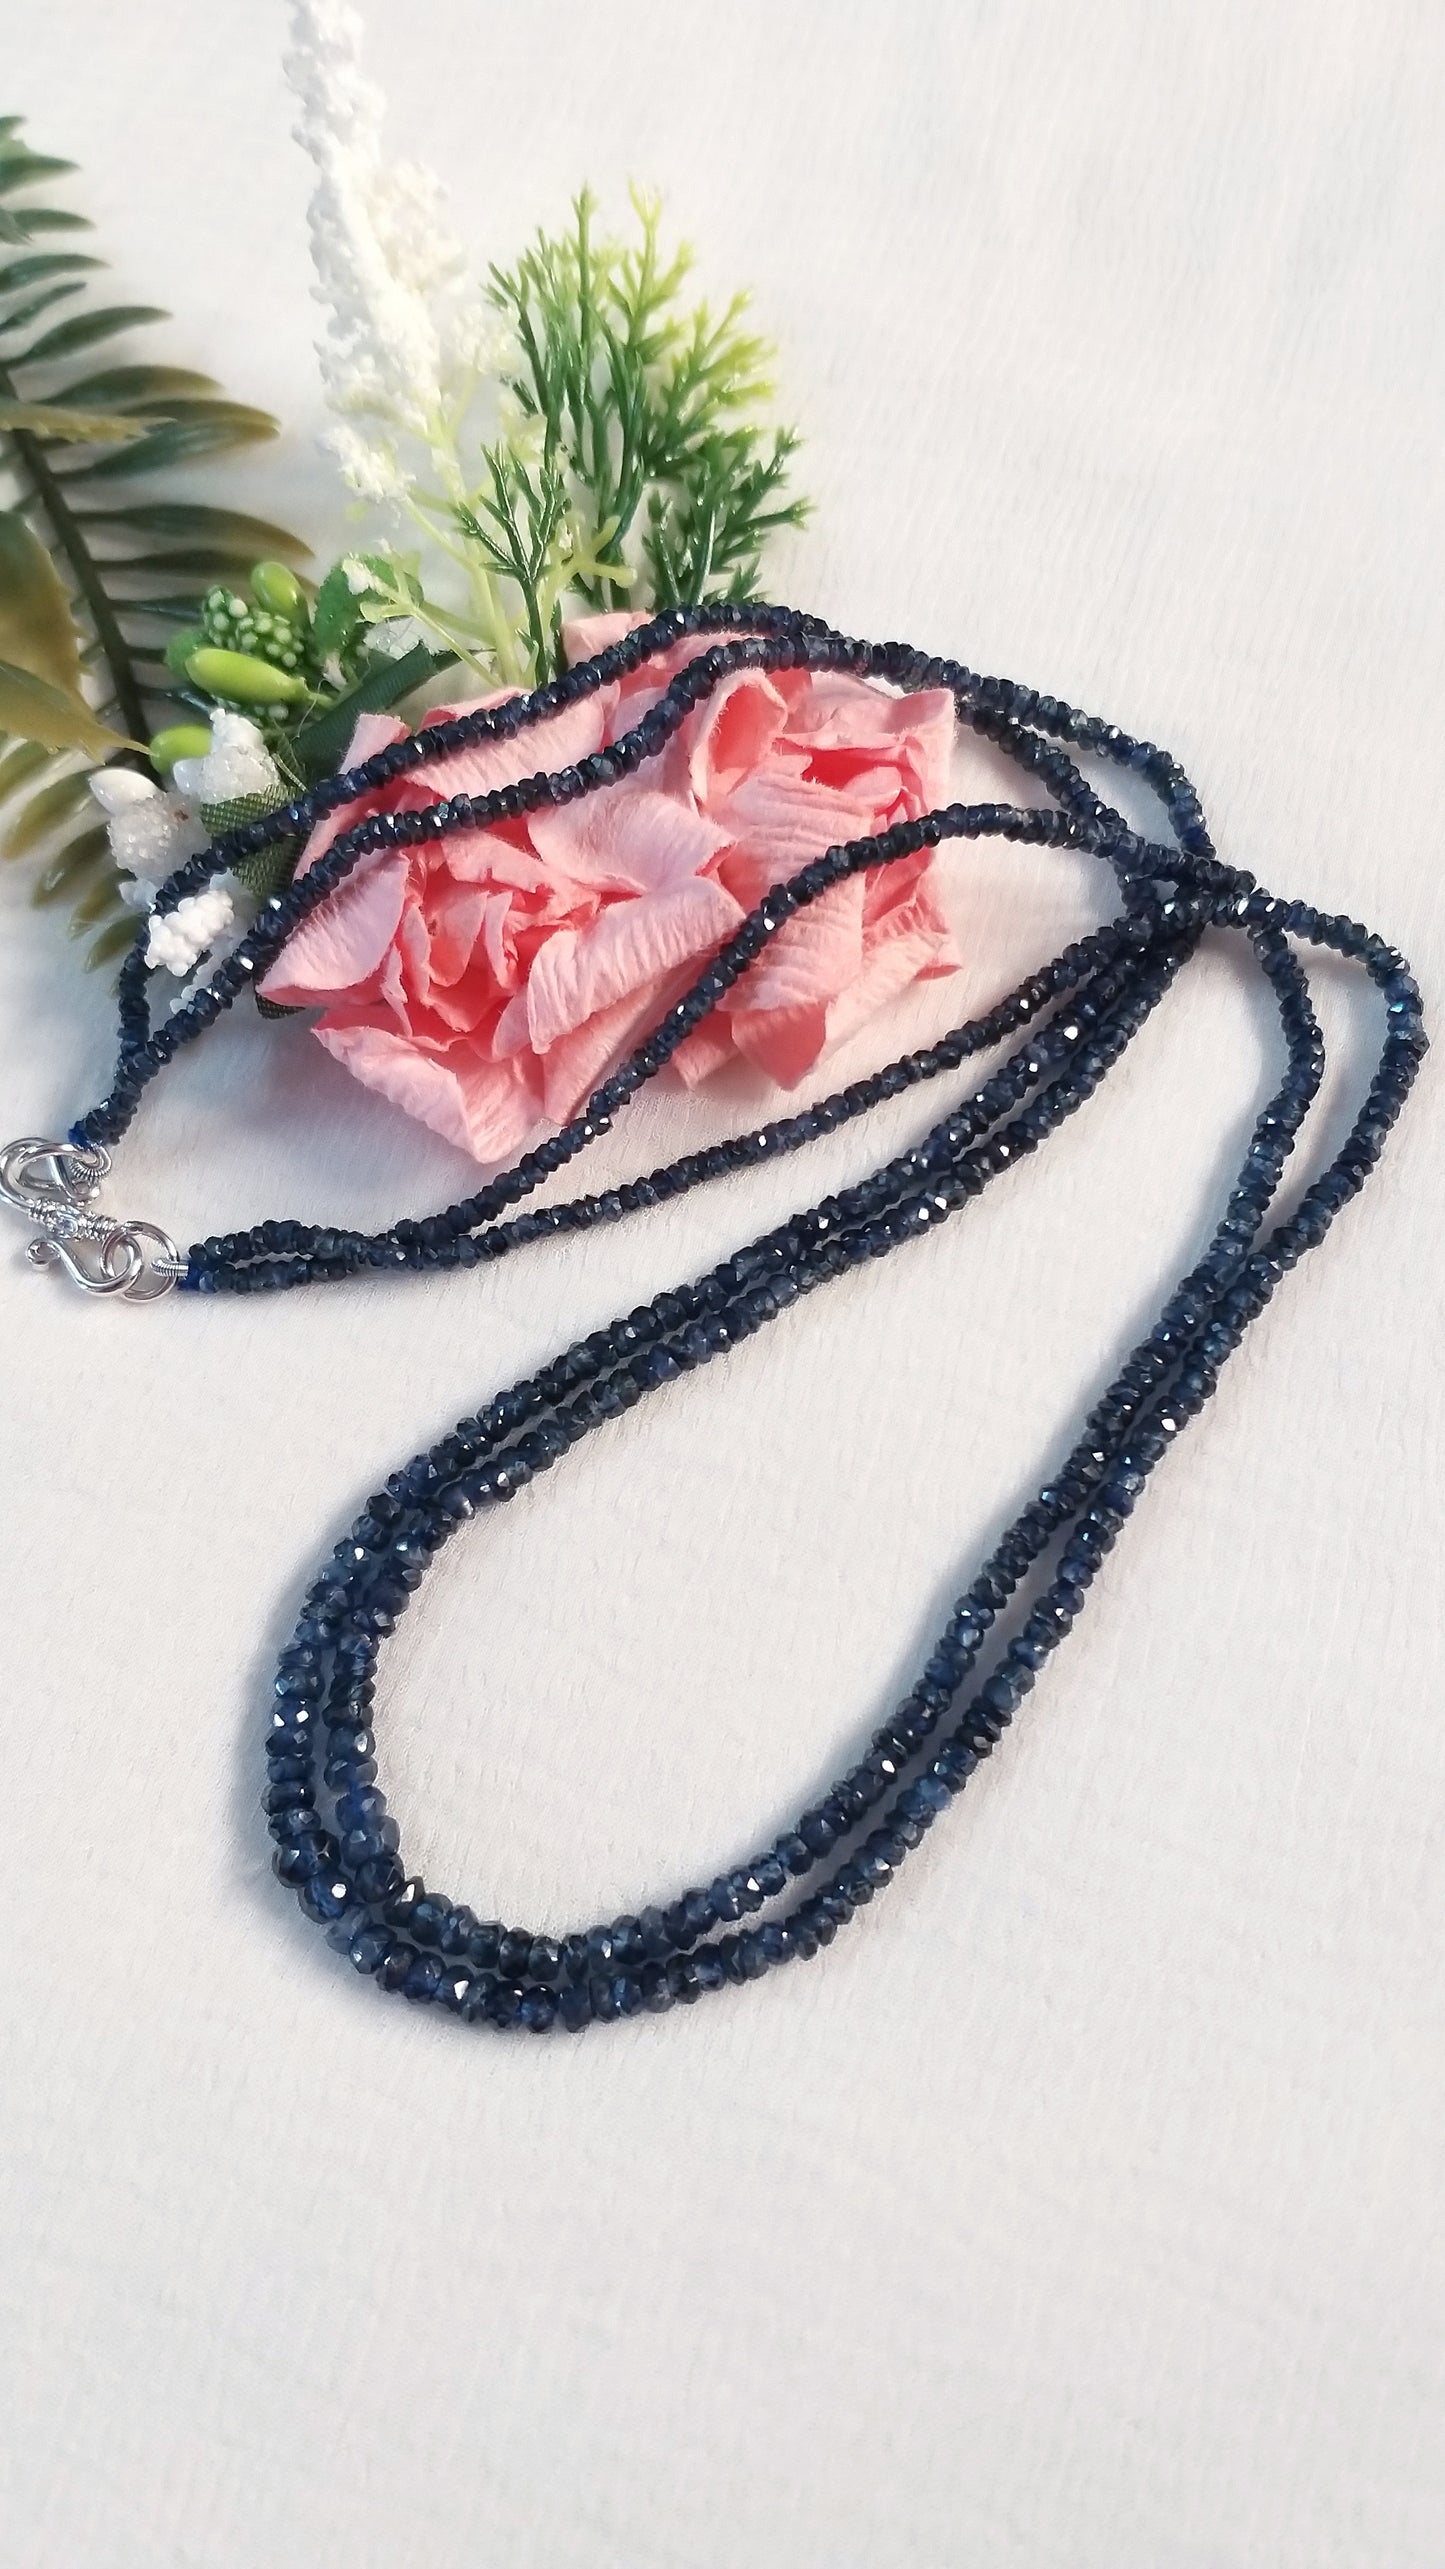 Natural Blue Sapphire Faceted Beads Necklace, Blue Sapphire Necklace